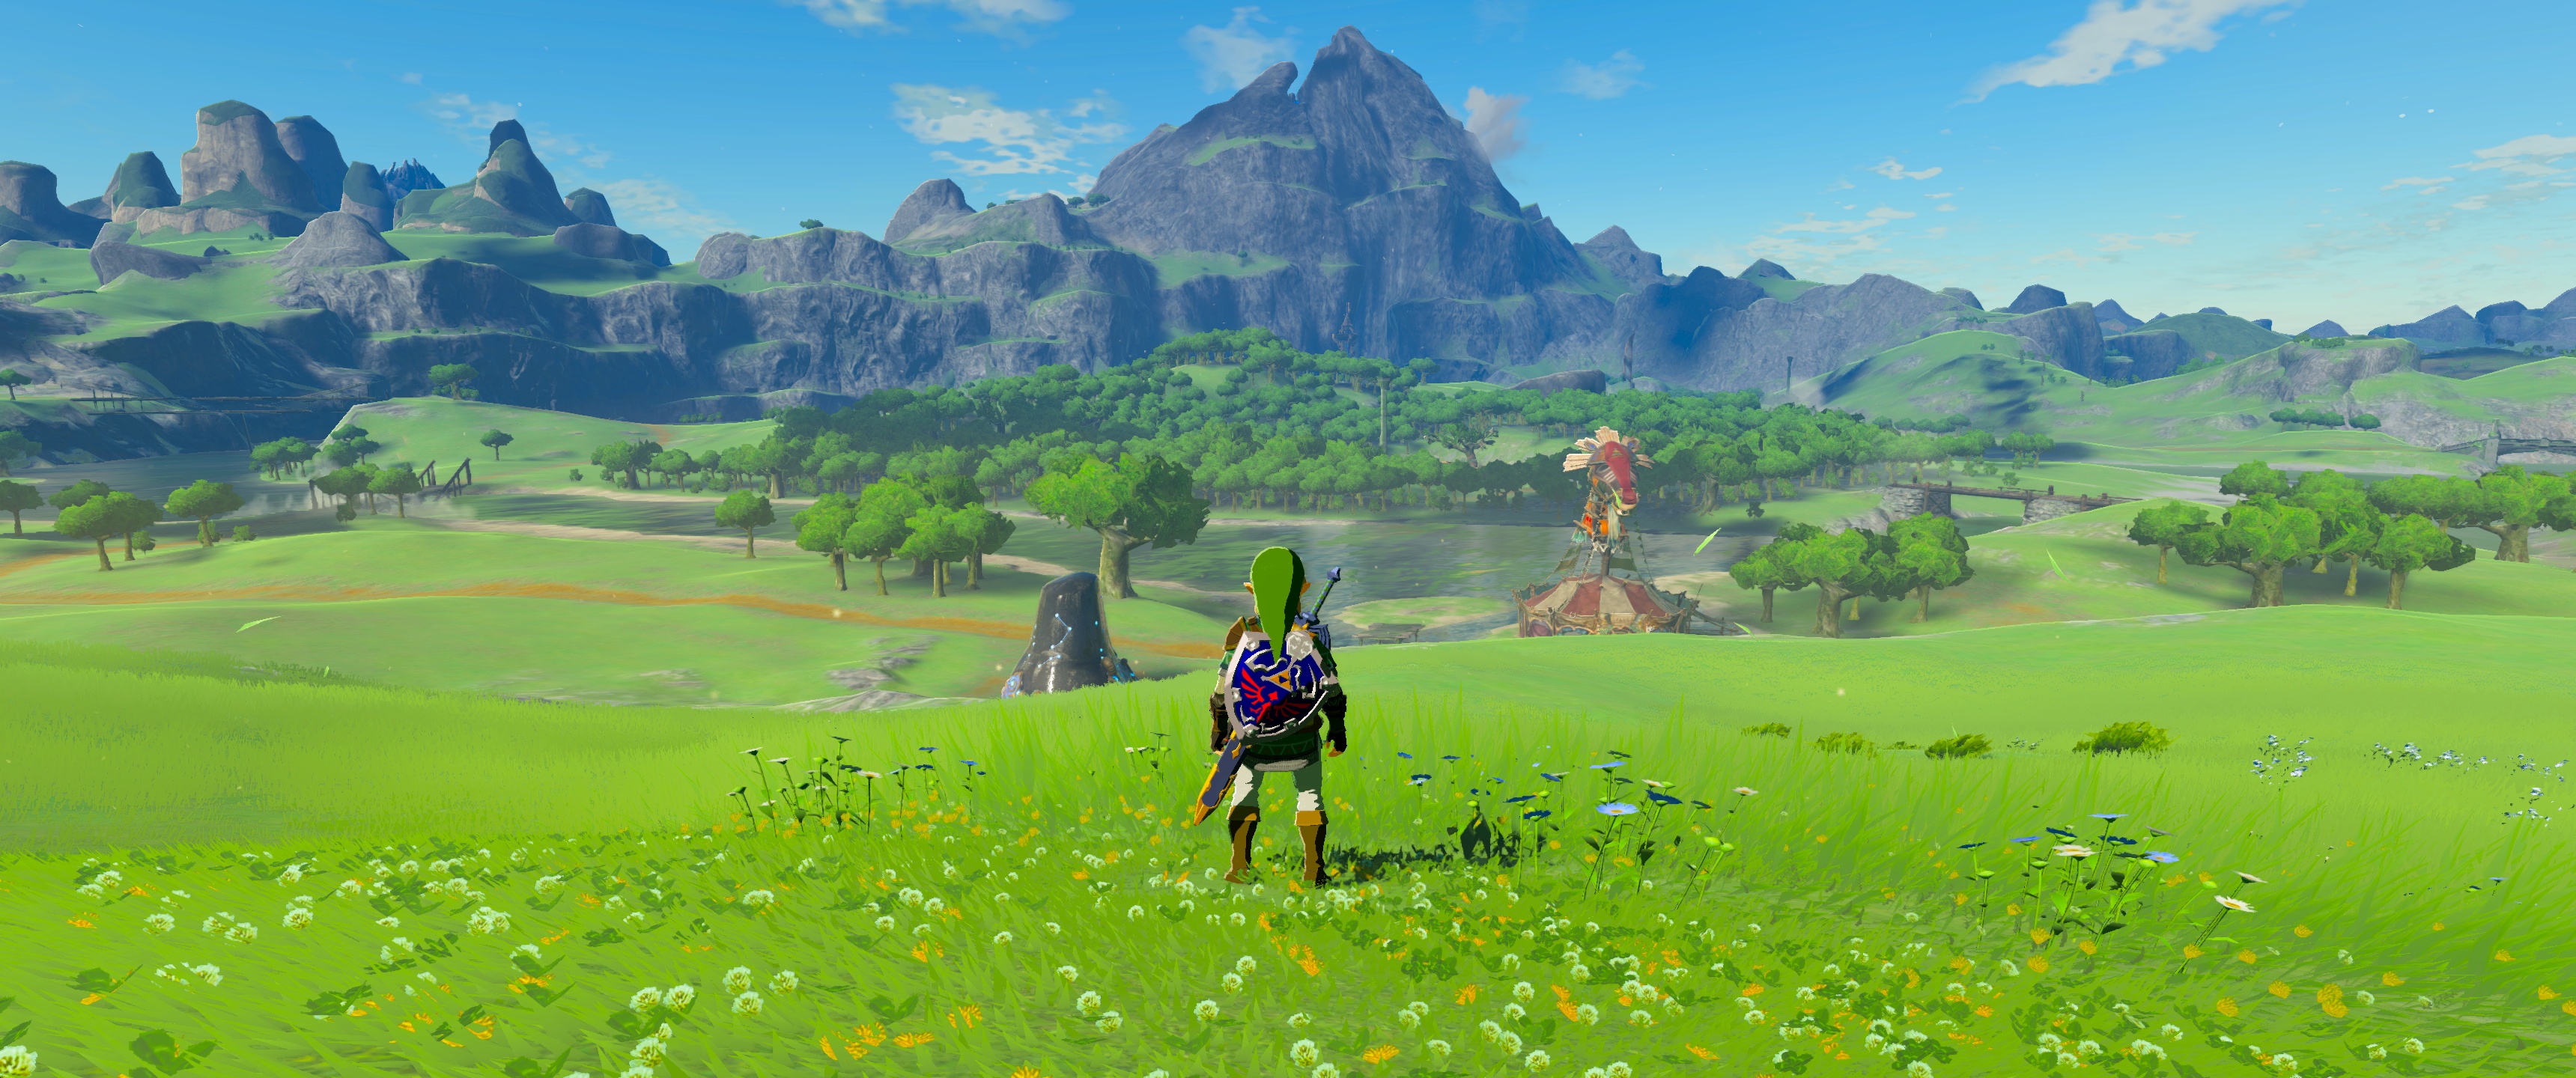 is the legend of zelda breath of the wild on pc